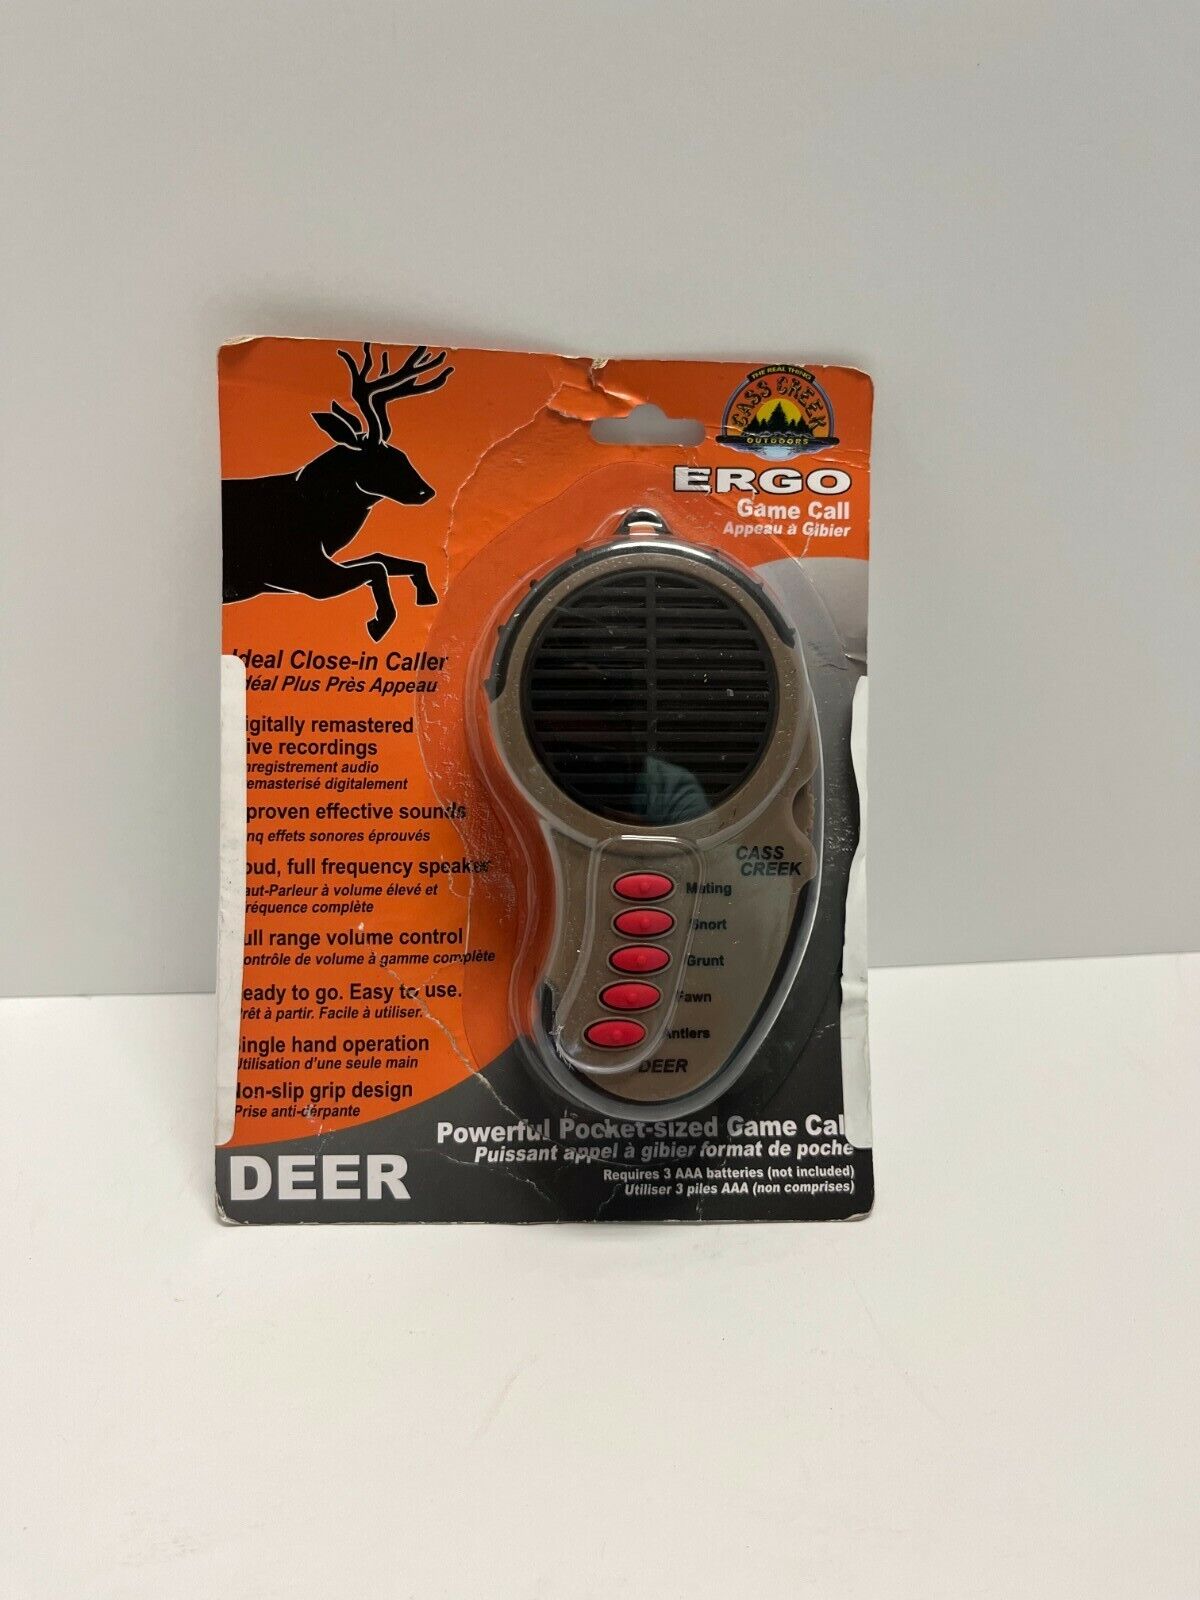 ERGO Deer call. Comes with Mating, Snort, Grunt, Fawn, and Antlers sounds